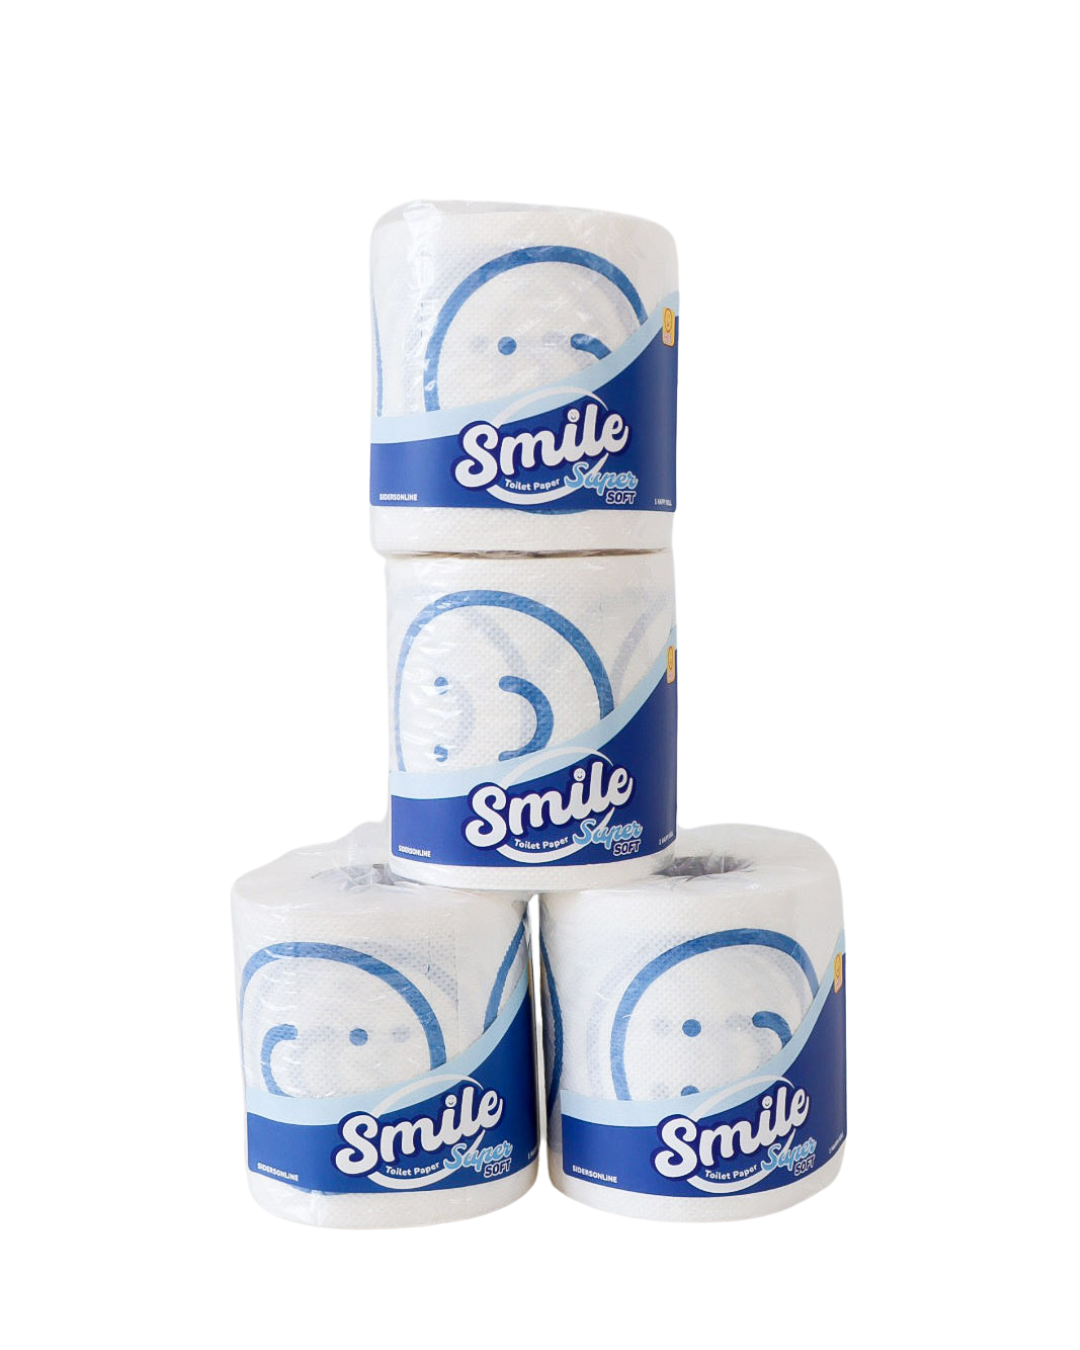 Smile Toilet Paper (Pack of 4)